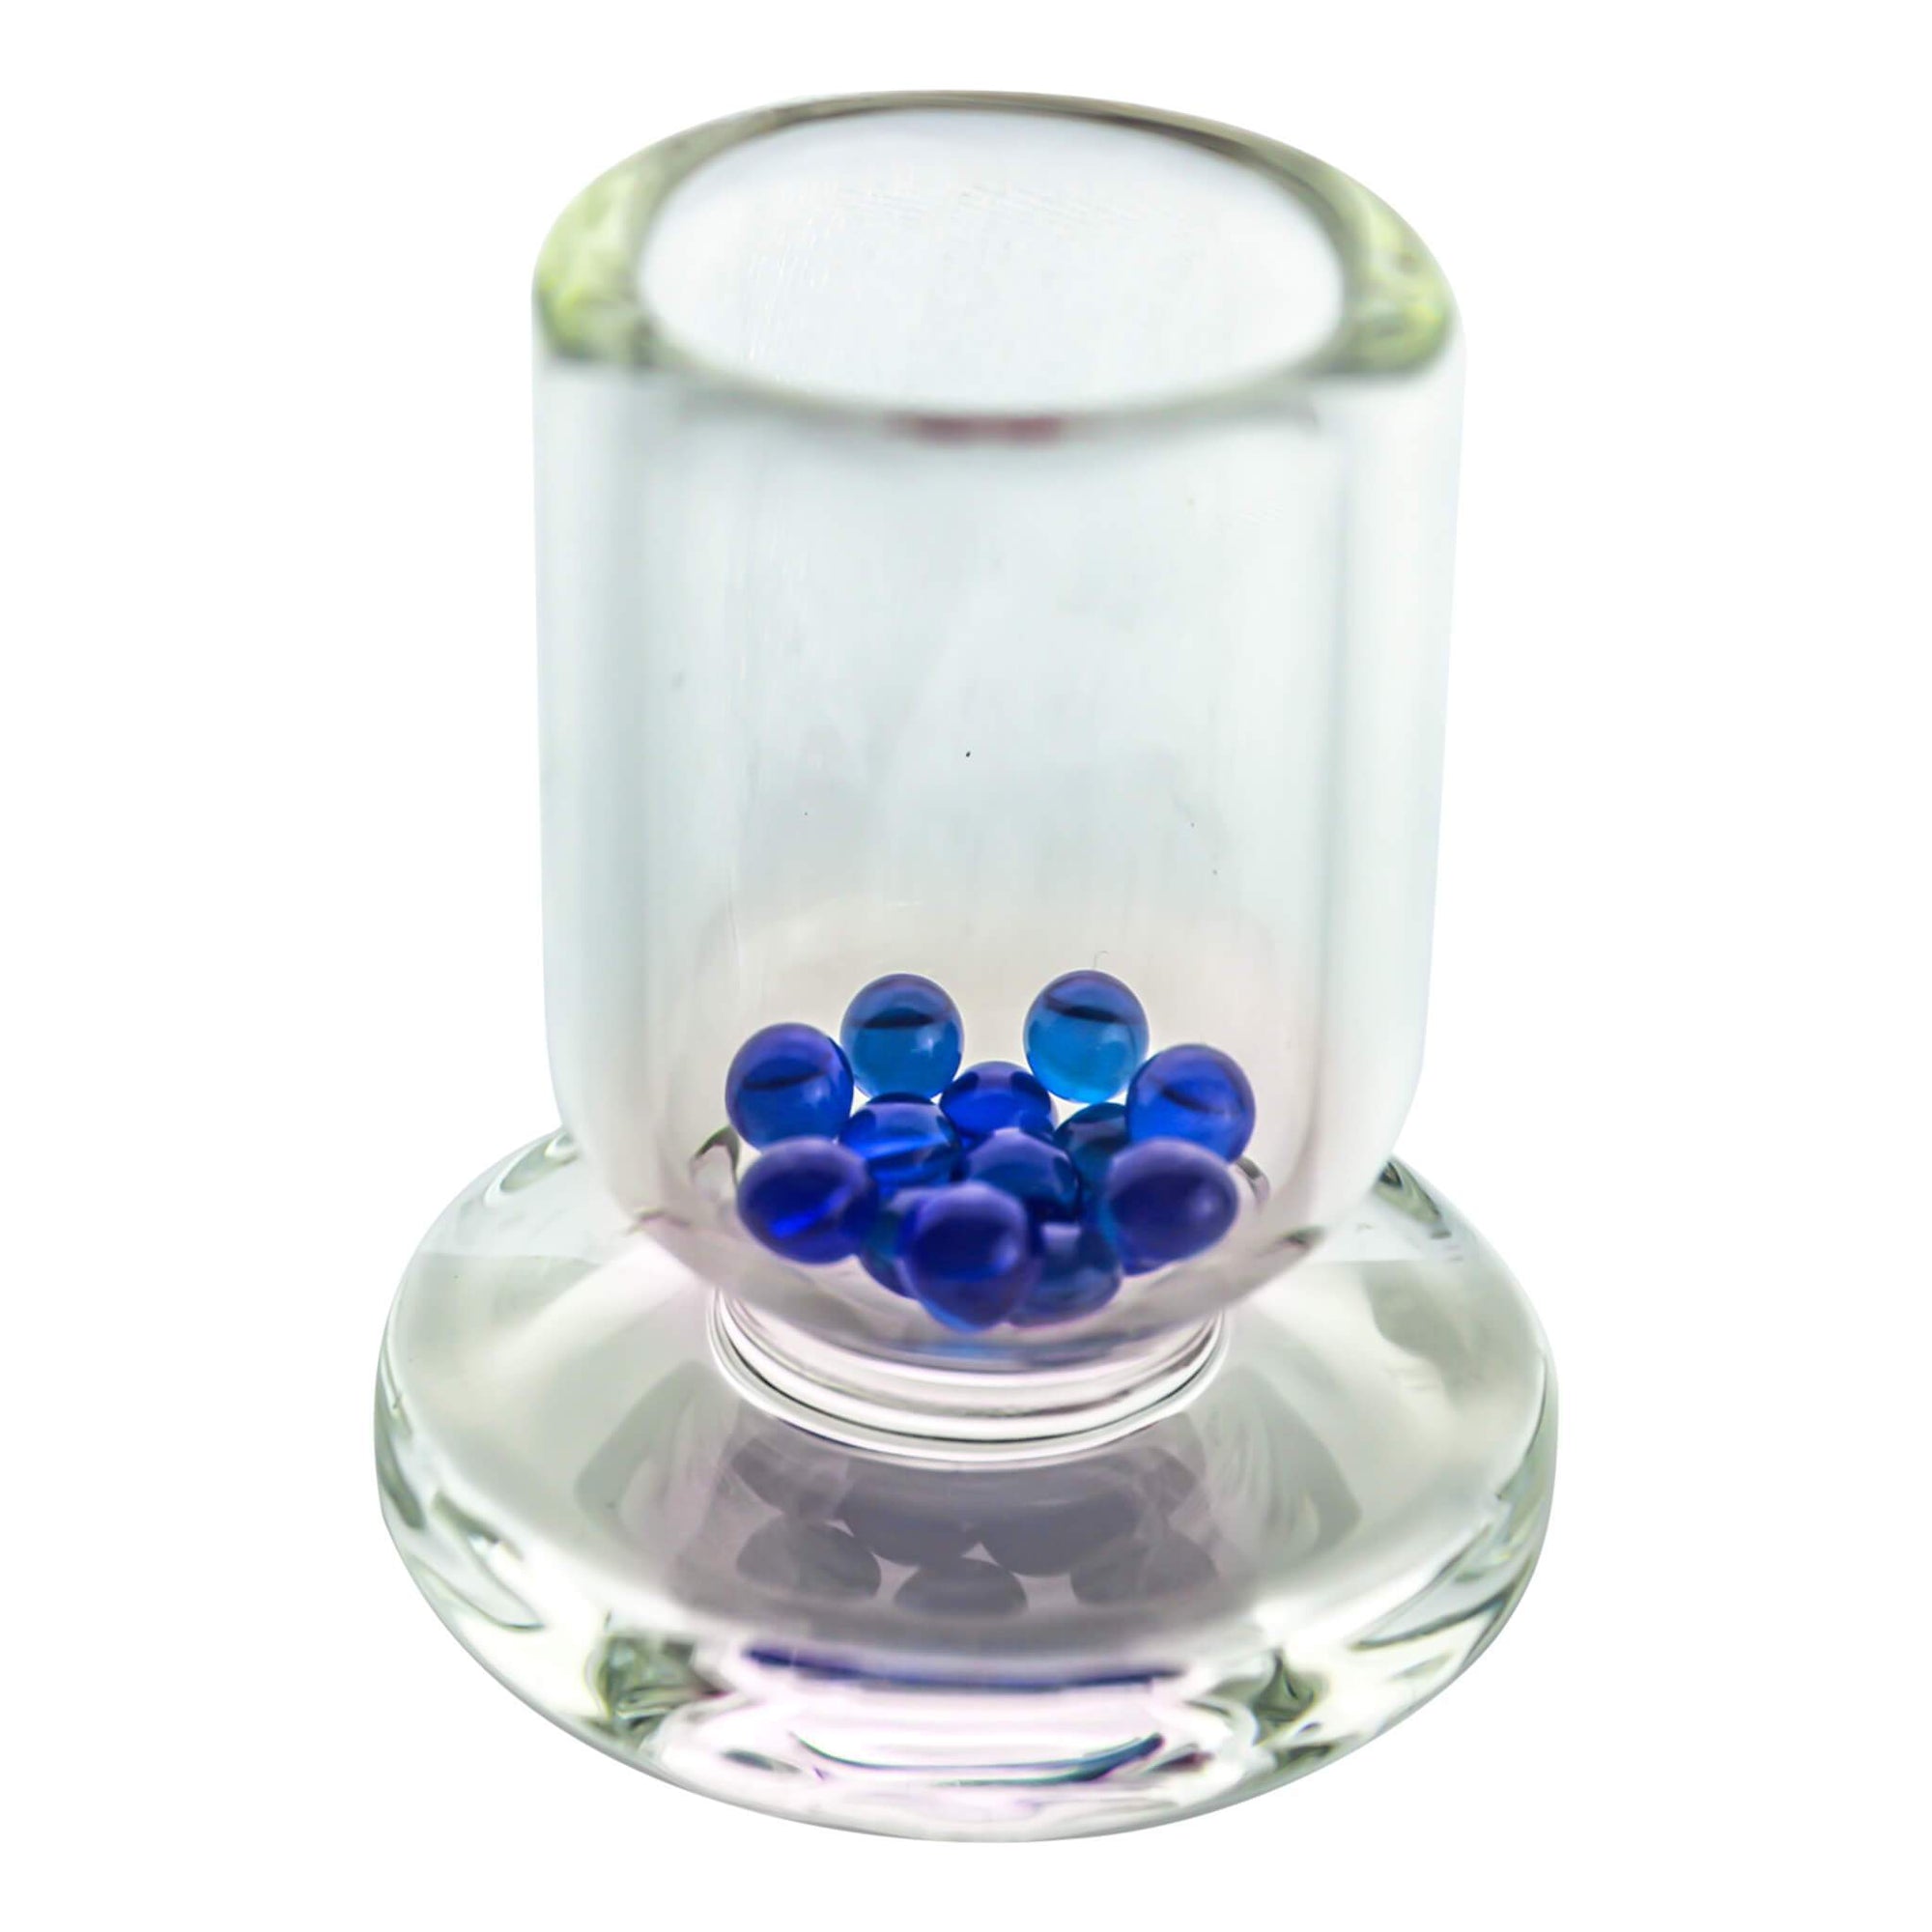 4mm Terp (Dab) Pearls-Blue Crystal | Blue Crystal Terp Pearls In Cup View | DW